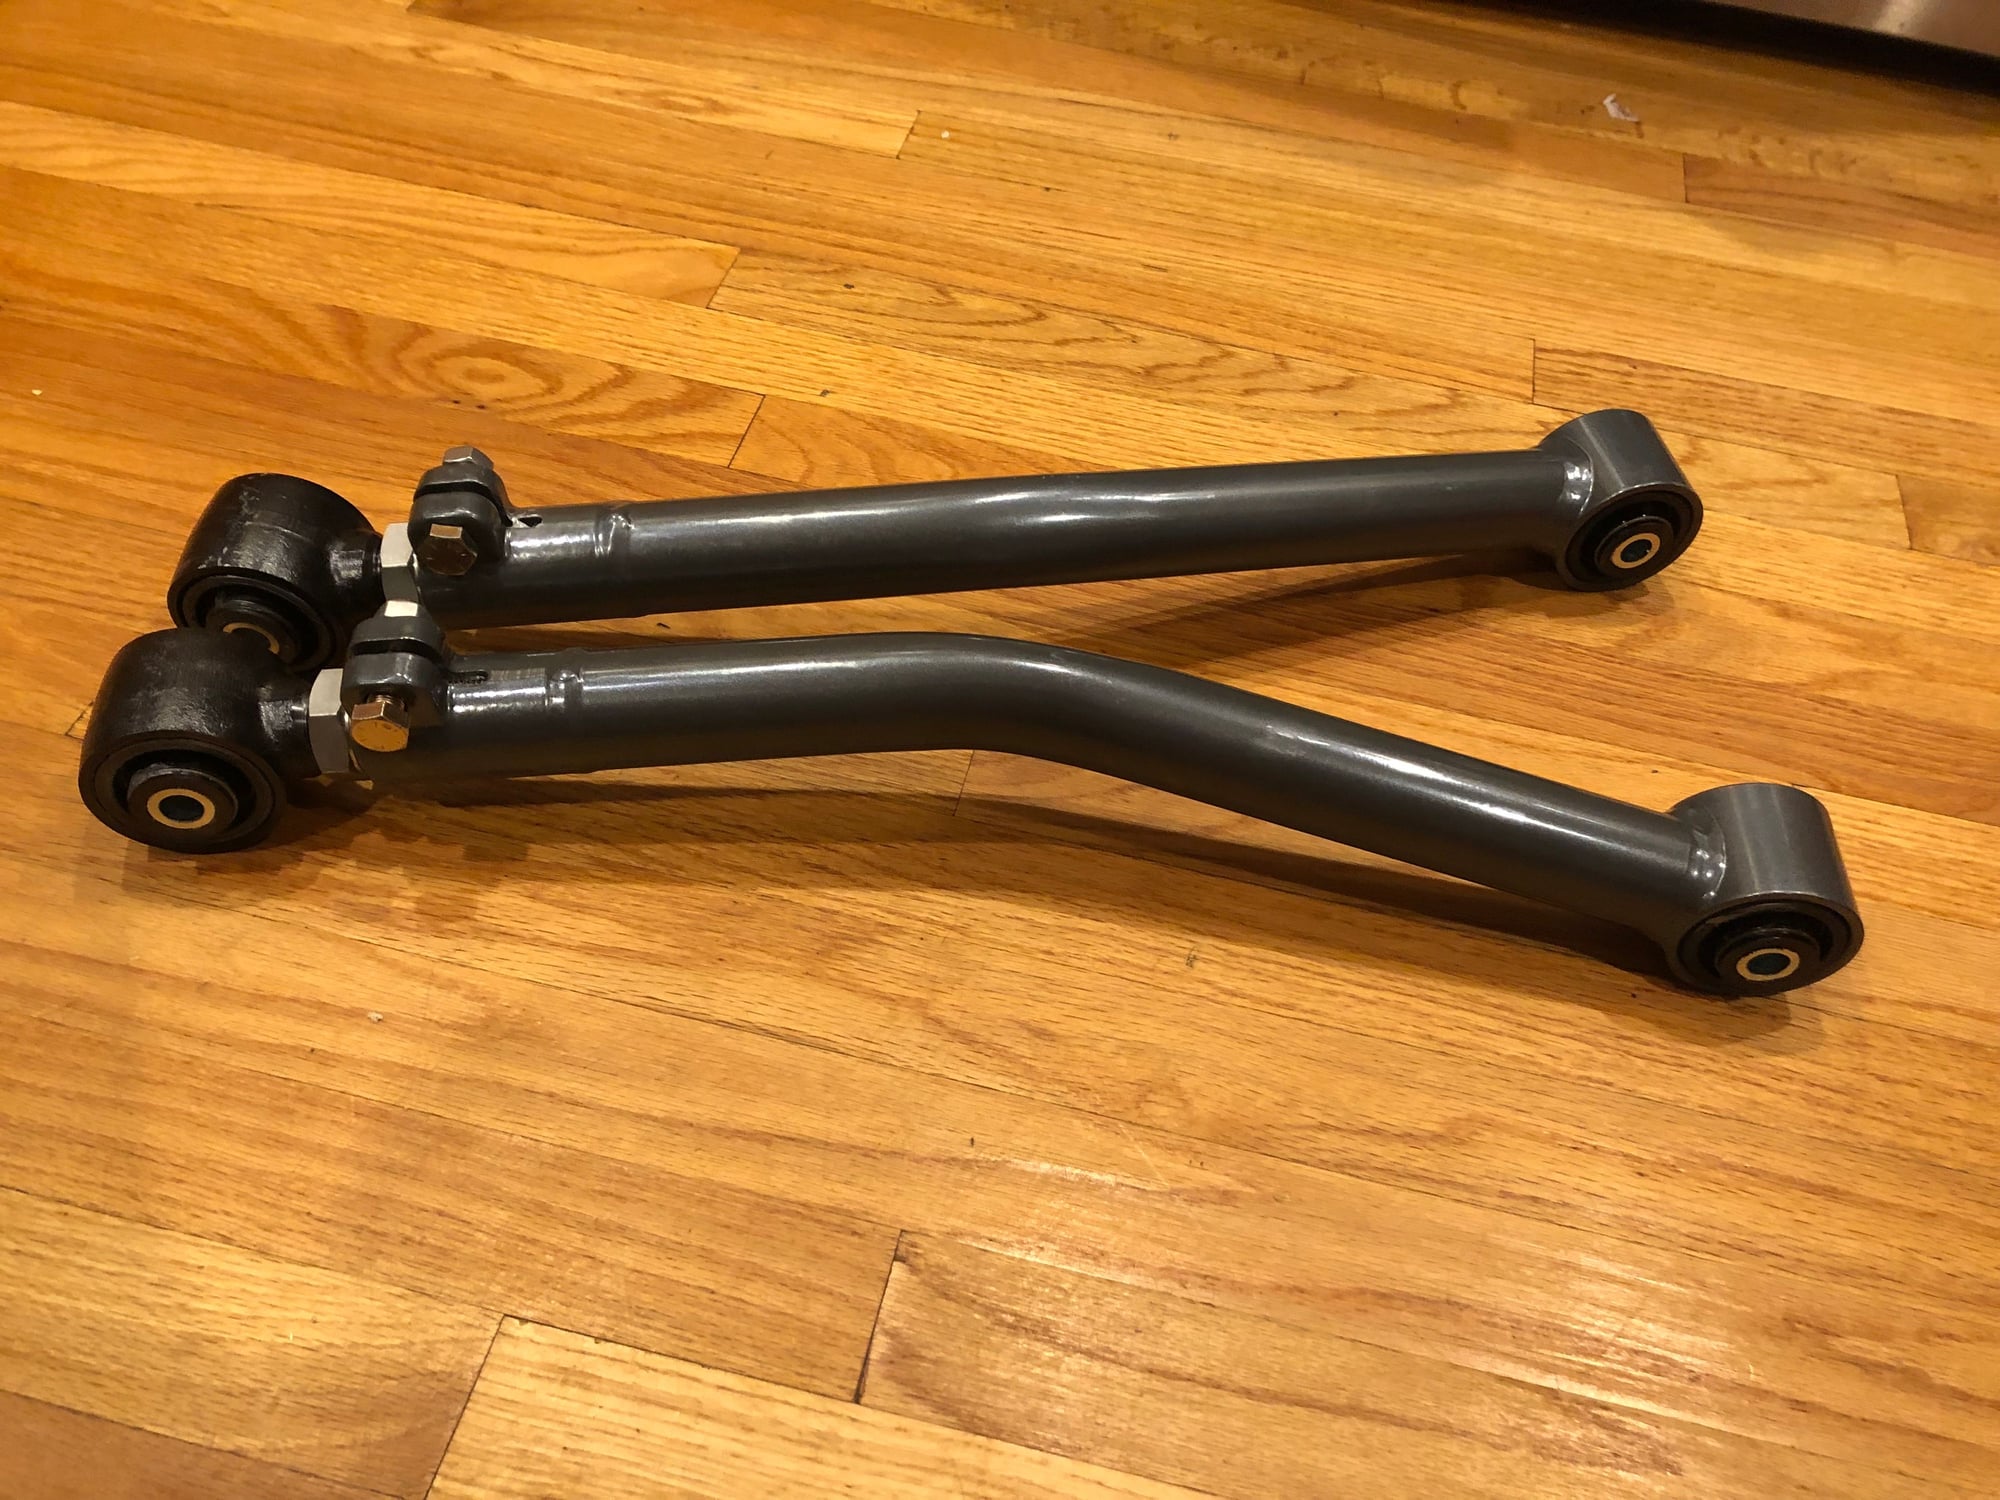 Steering/Suspension - JK Synergy Adjustable Front Lower Control Arms (New) - New - 2007 to 2018 Jeep Wrangler - East Meadow, NY 11554, United States